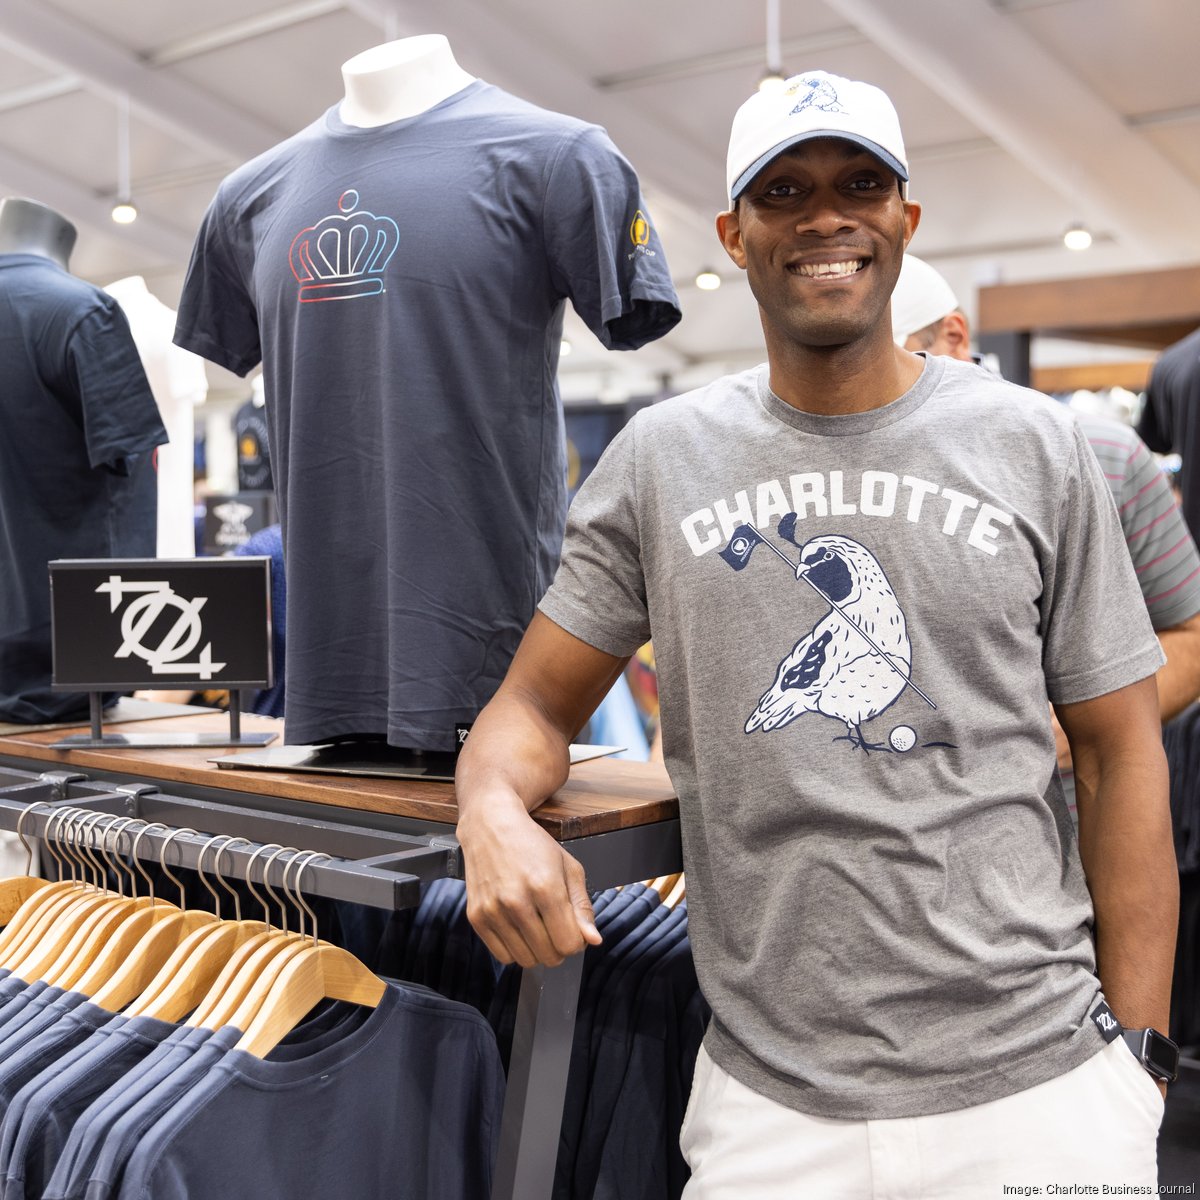 704 Shop scores prime retail exposure at Presidents Cup in Charlotte